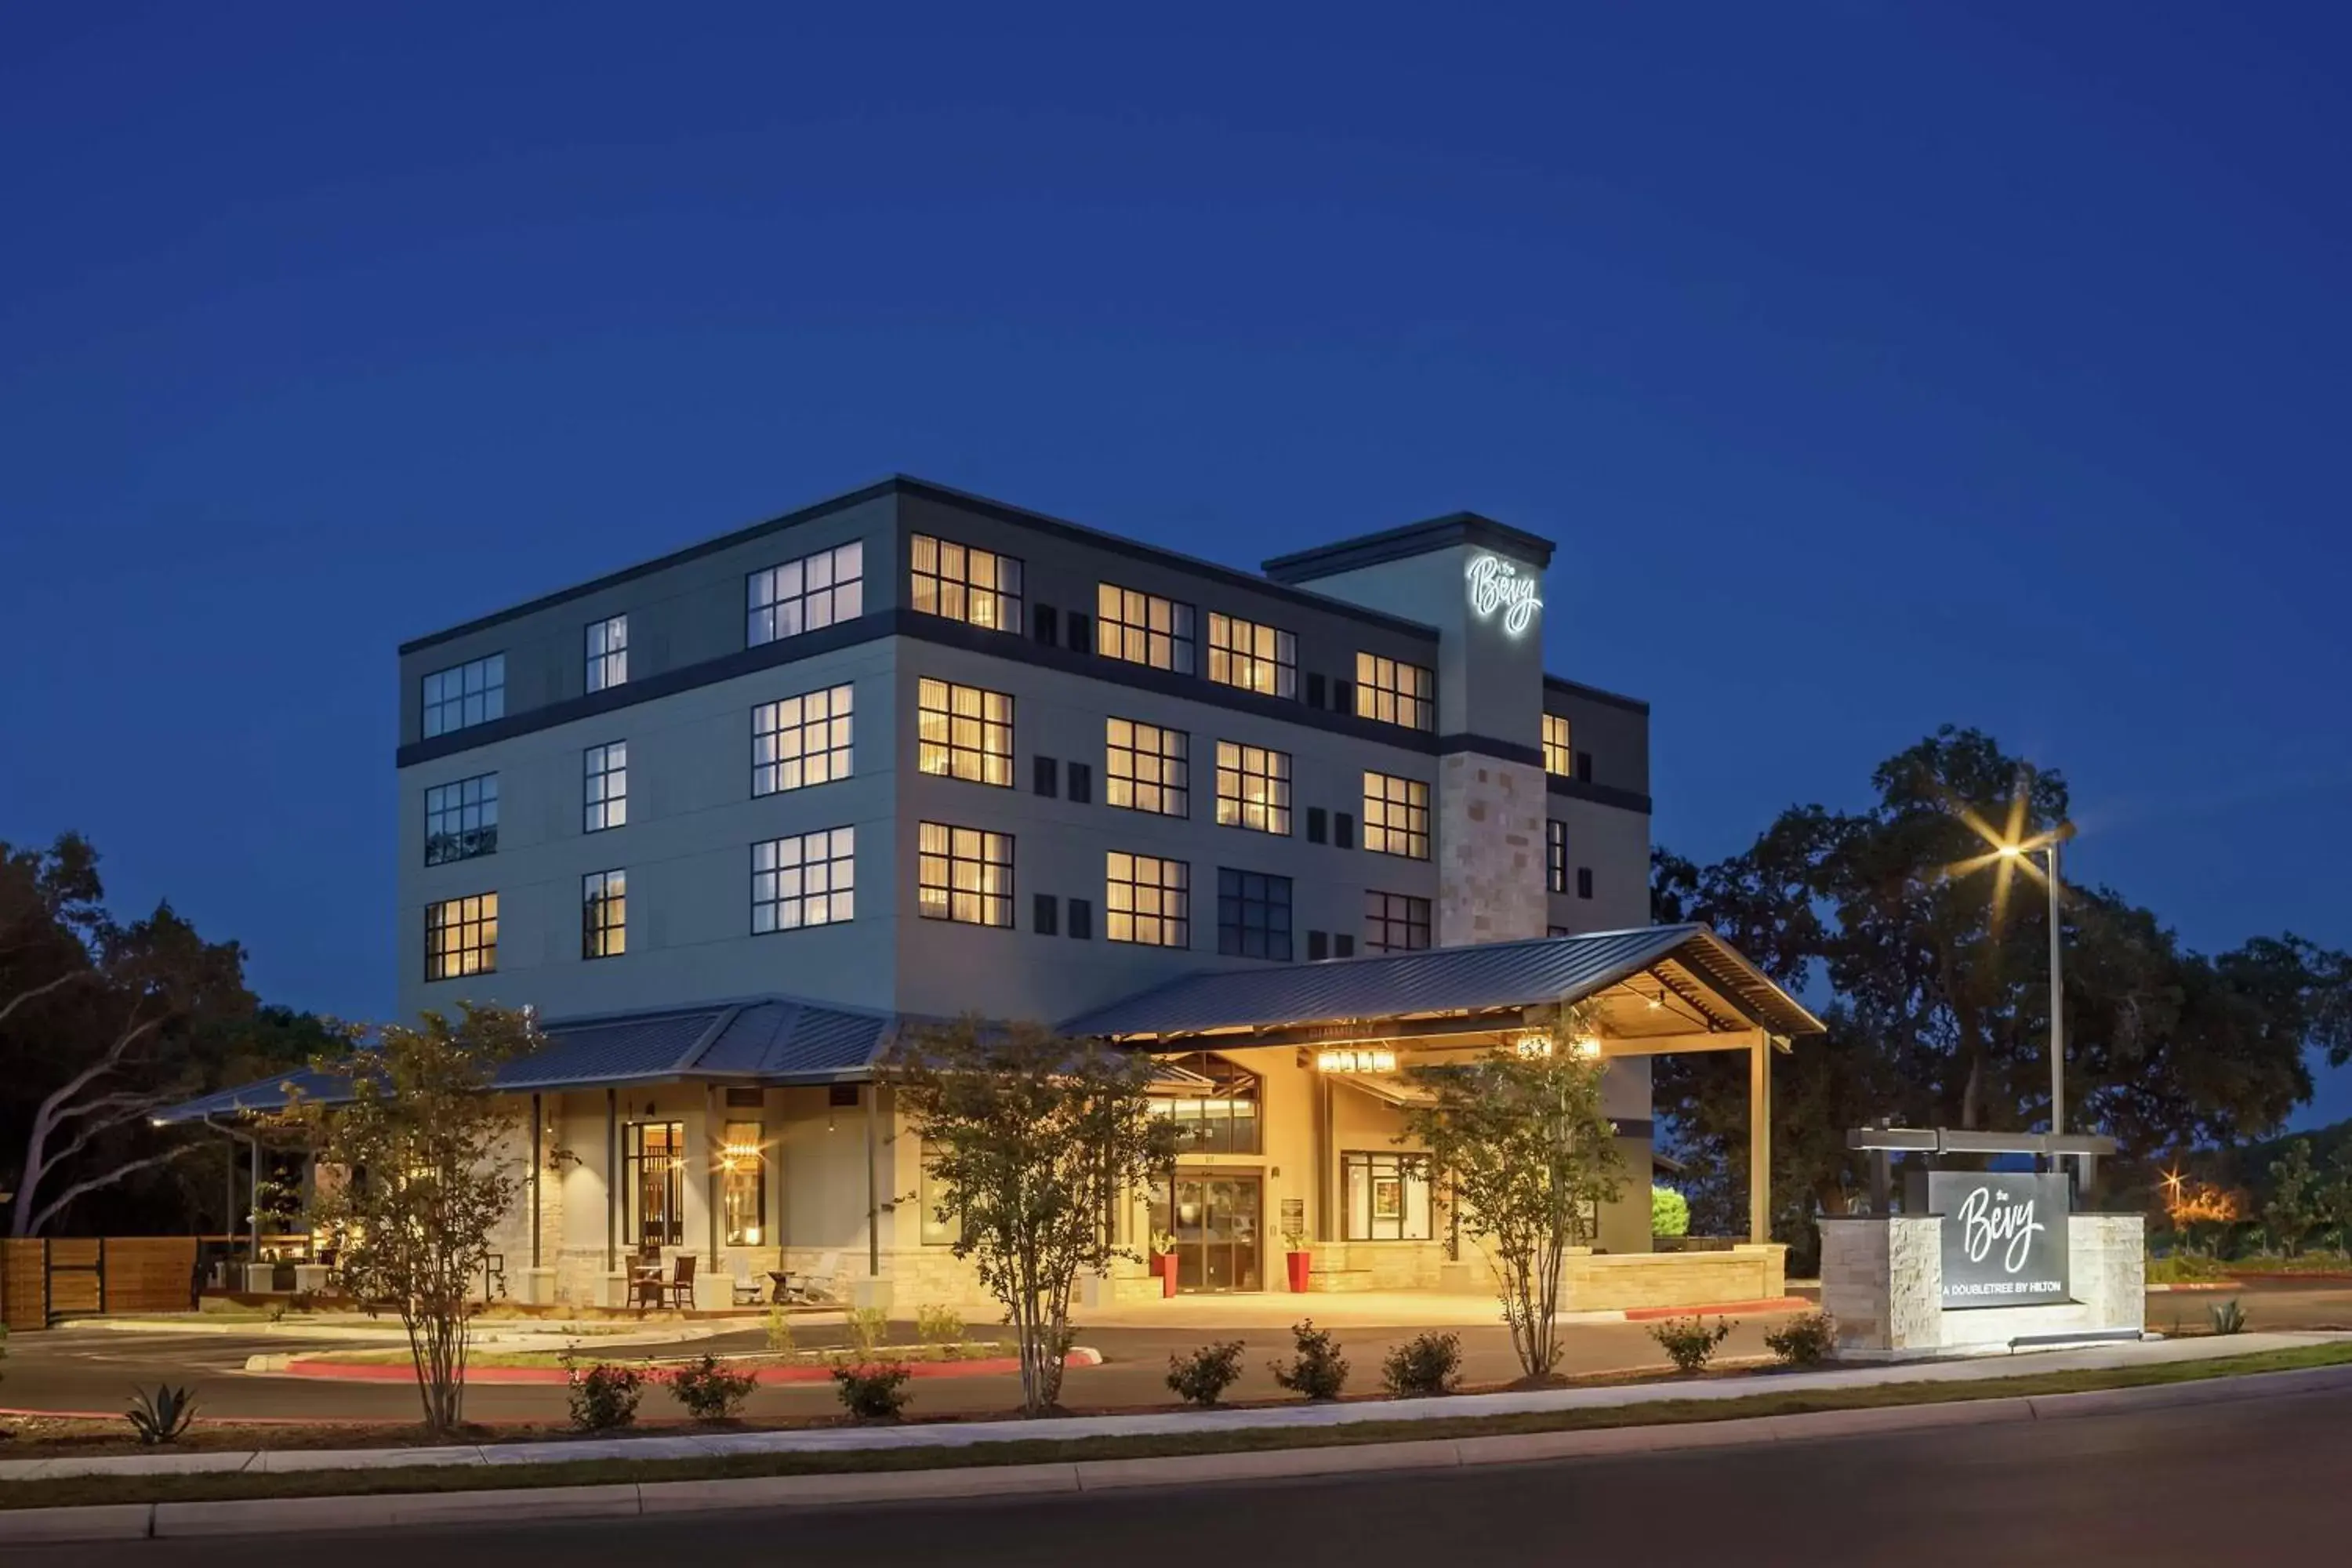 Other, Property Building in The Bevy Hotel Boerne, A Doubletree By Hilton